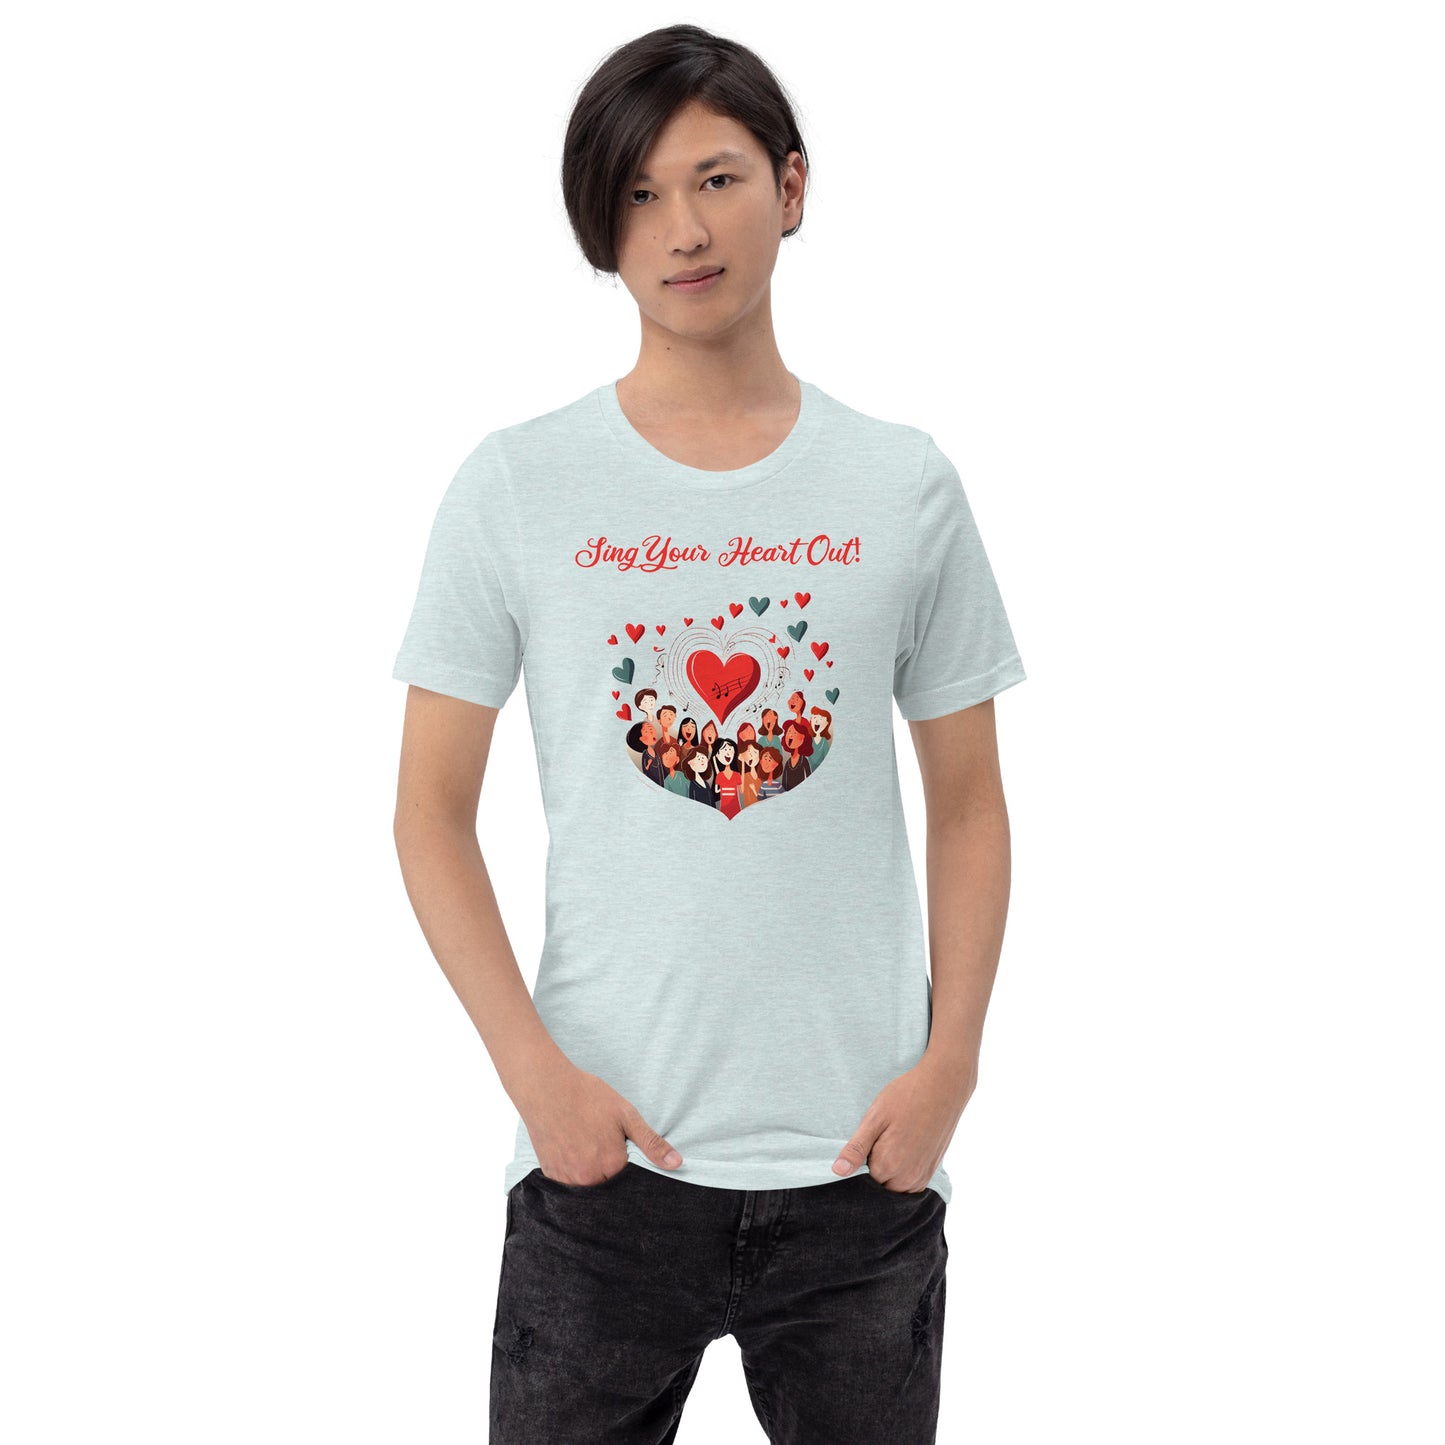 Sing Your Heart Out - Unisex t-shirt